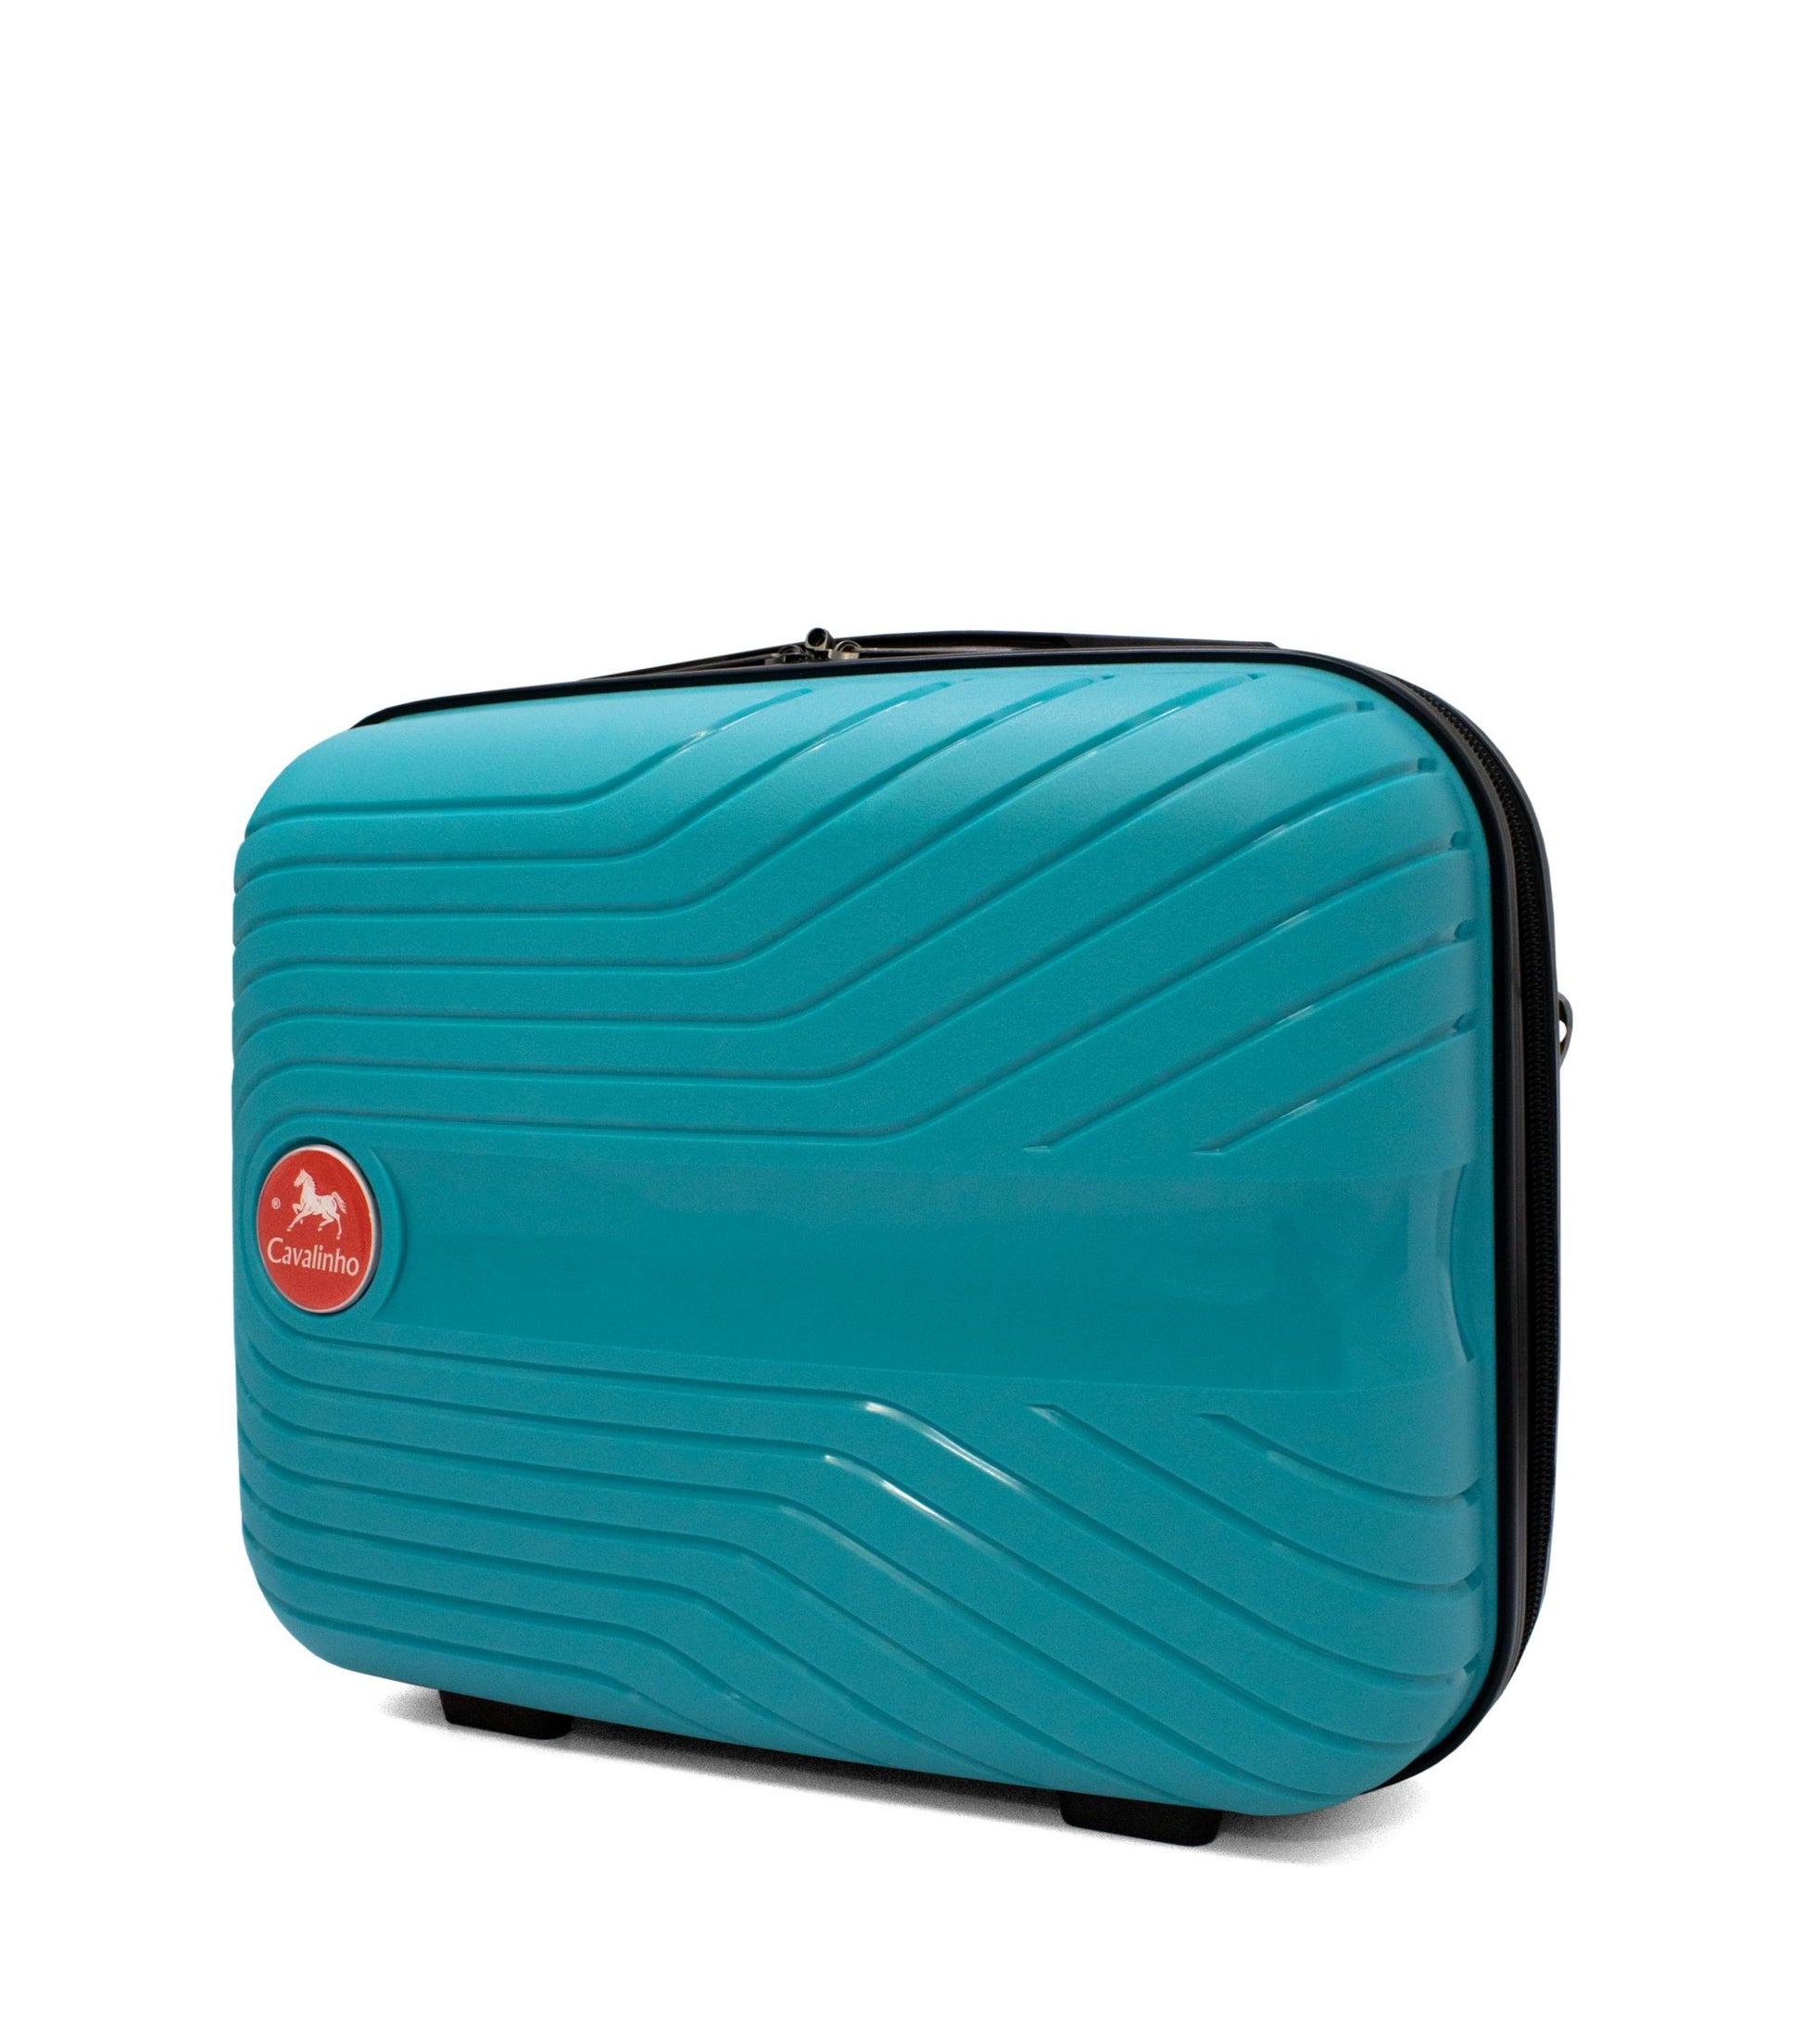 #color_ 15 inch DarkTurquoise | Cavalinho Colorful Hardside Toiletry Tote (15") - 15 inch DarkTurquoise - 68020004.25.15_2